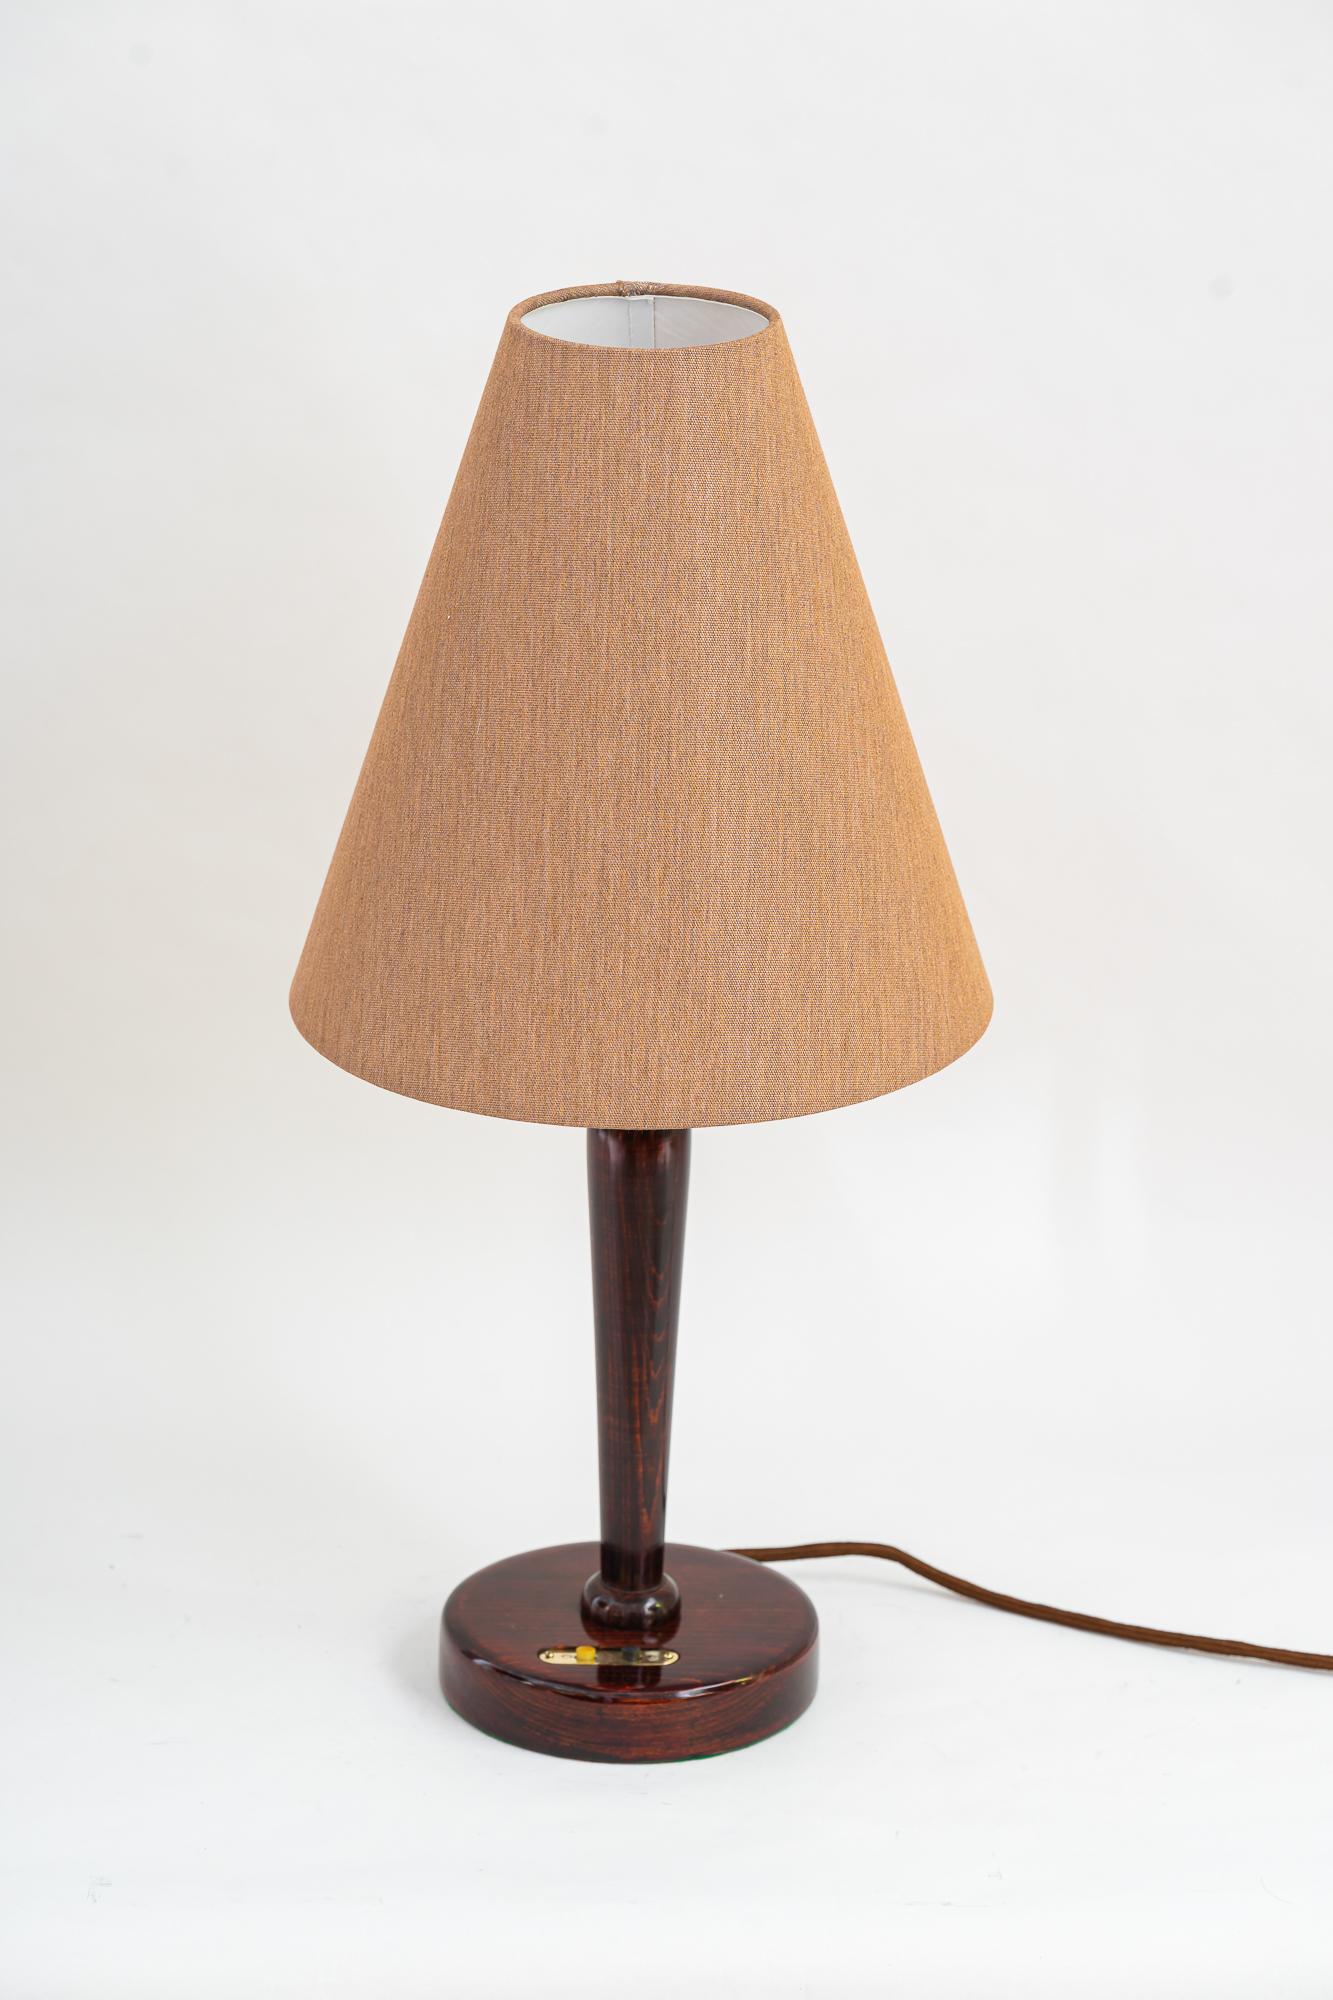 Art Deco wood table lamp with fabric shade vienna 1920s
Wood polished
The fabric shade is replaced ( new ).